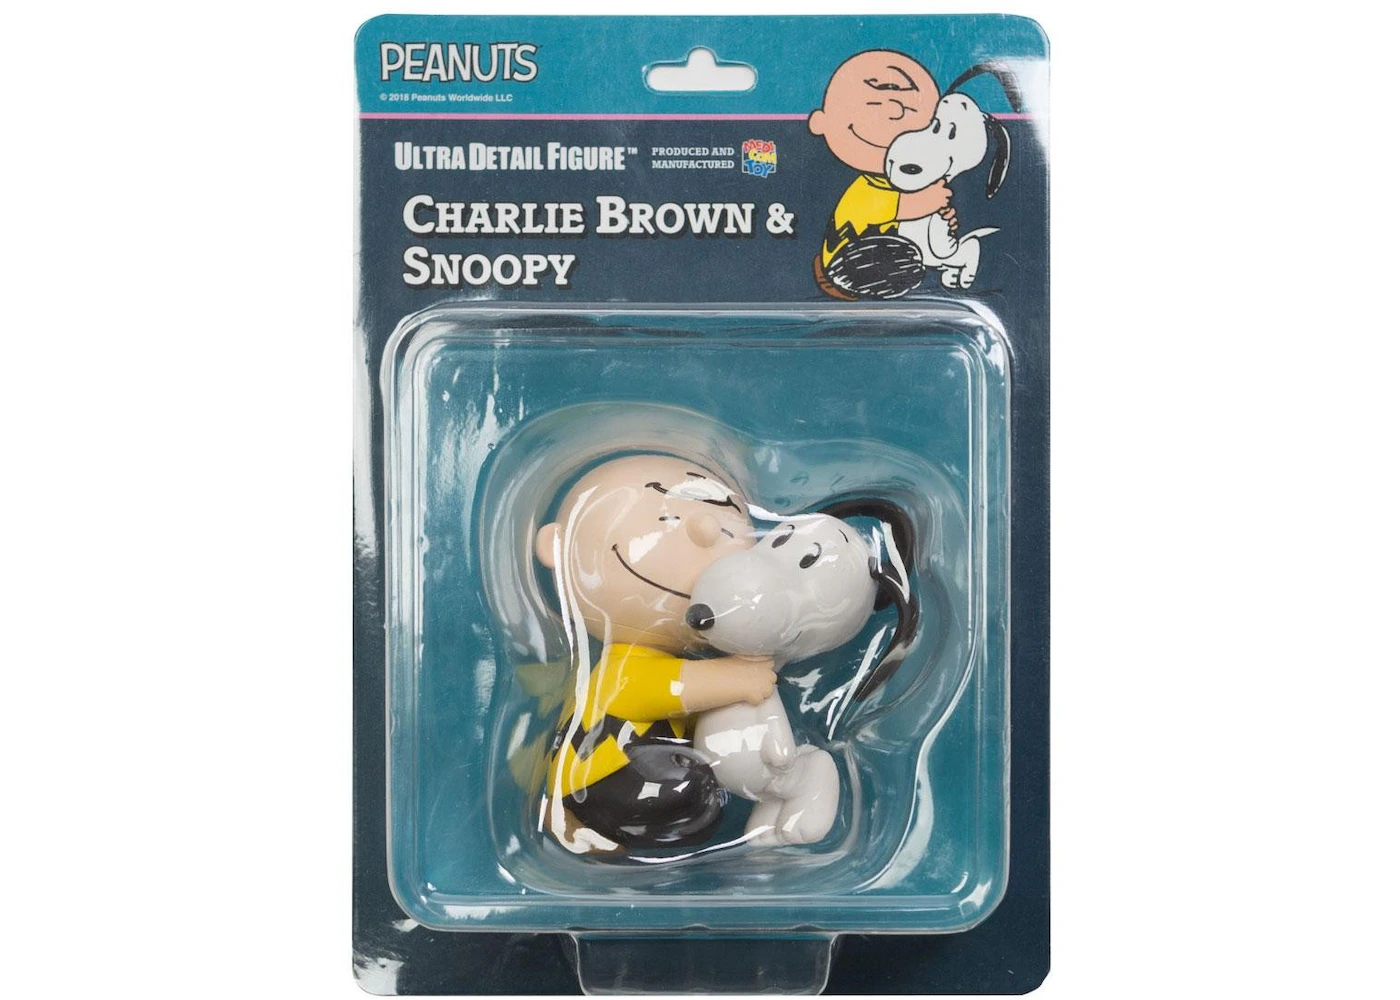 7.5 Peanuts Puppet Snoopy and Woodstock UDF Figures